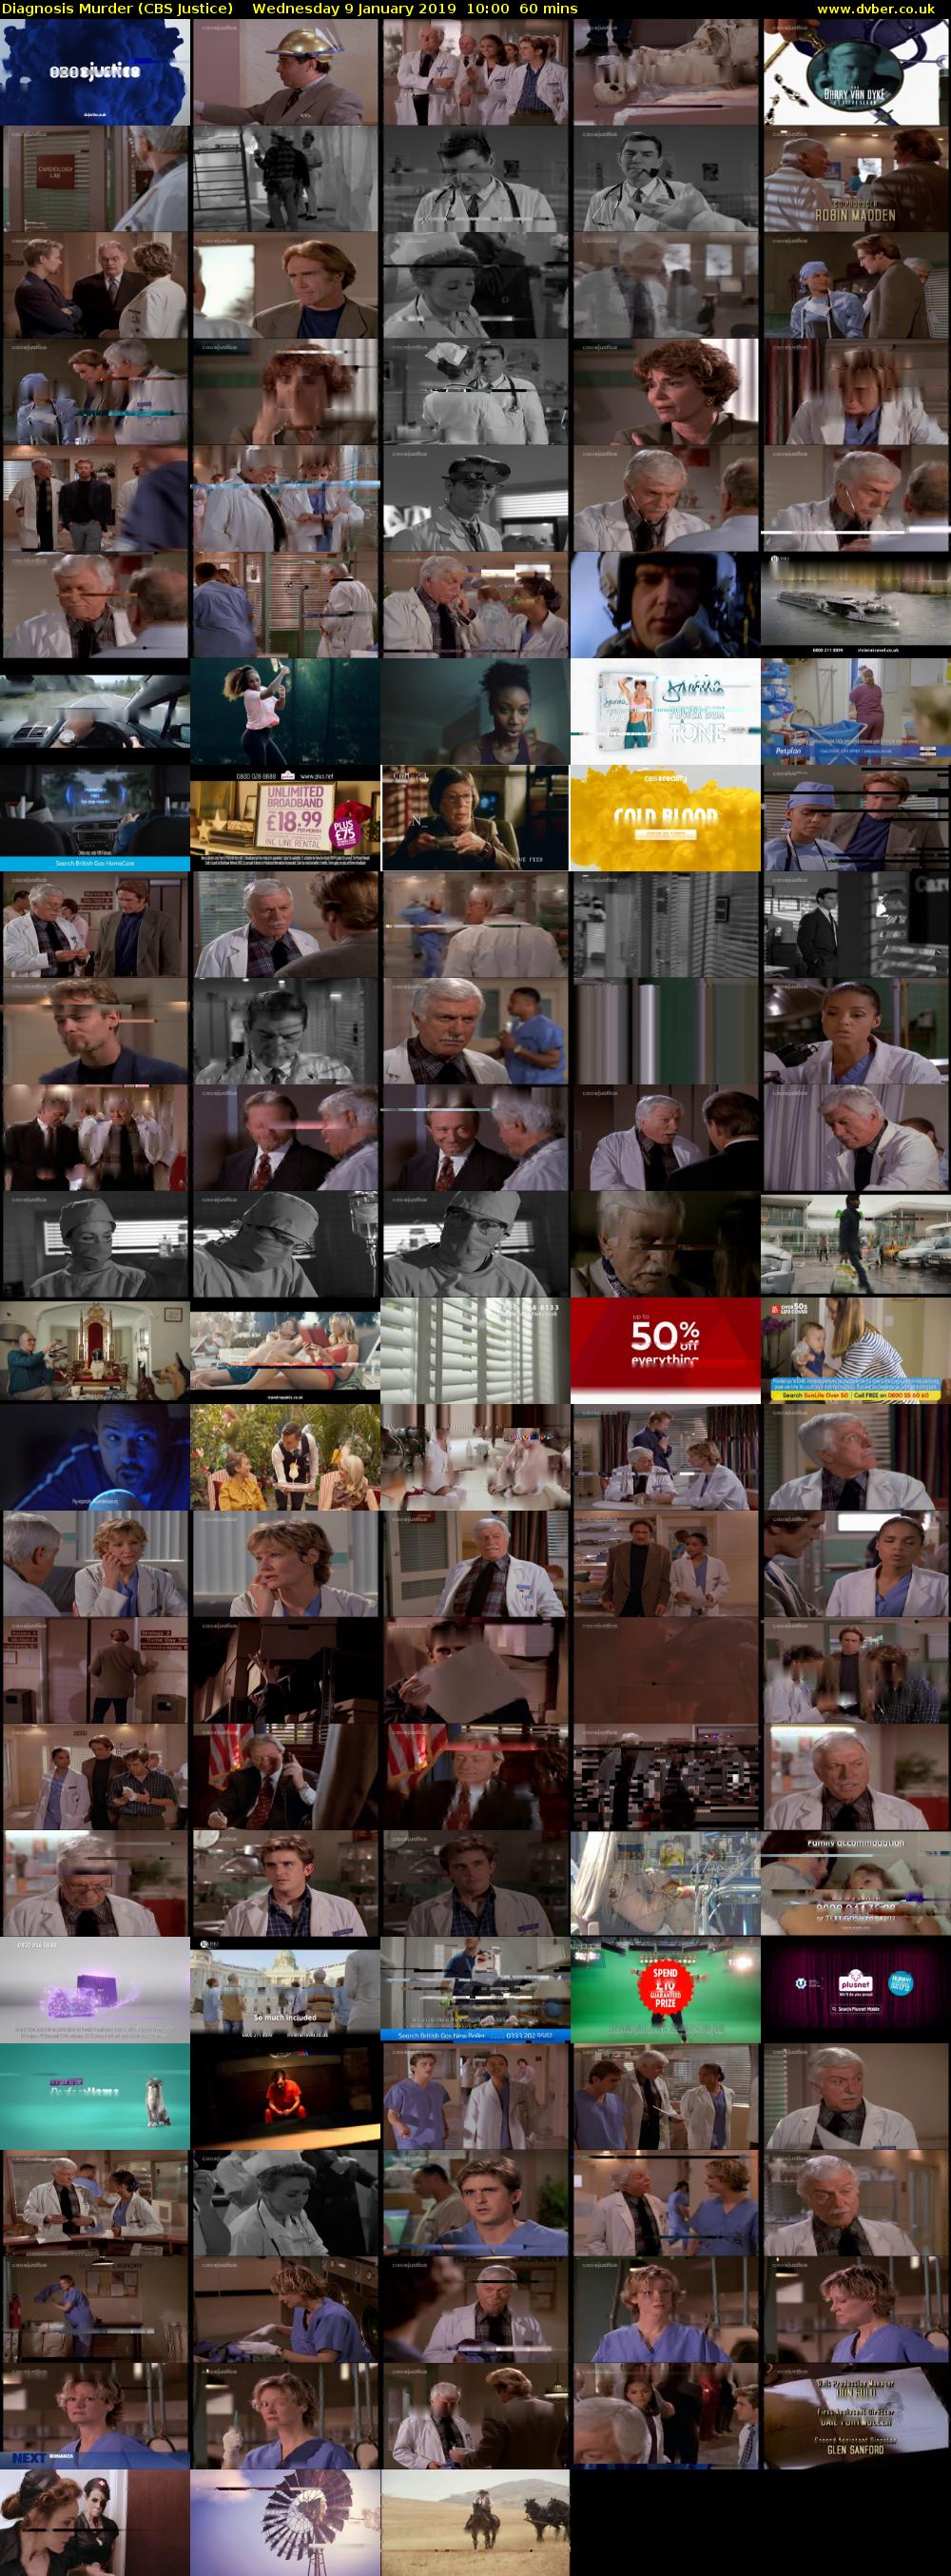 Diagnosis Murder (CBS Justice) Wednesday 9 January 2019 10:00 - 11:00